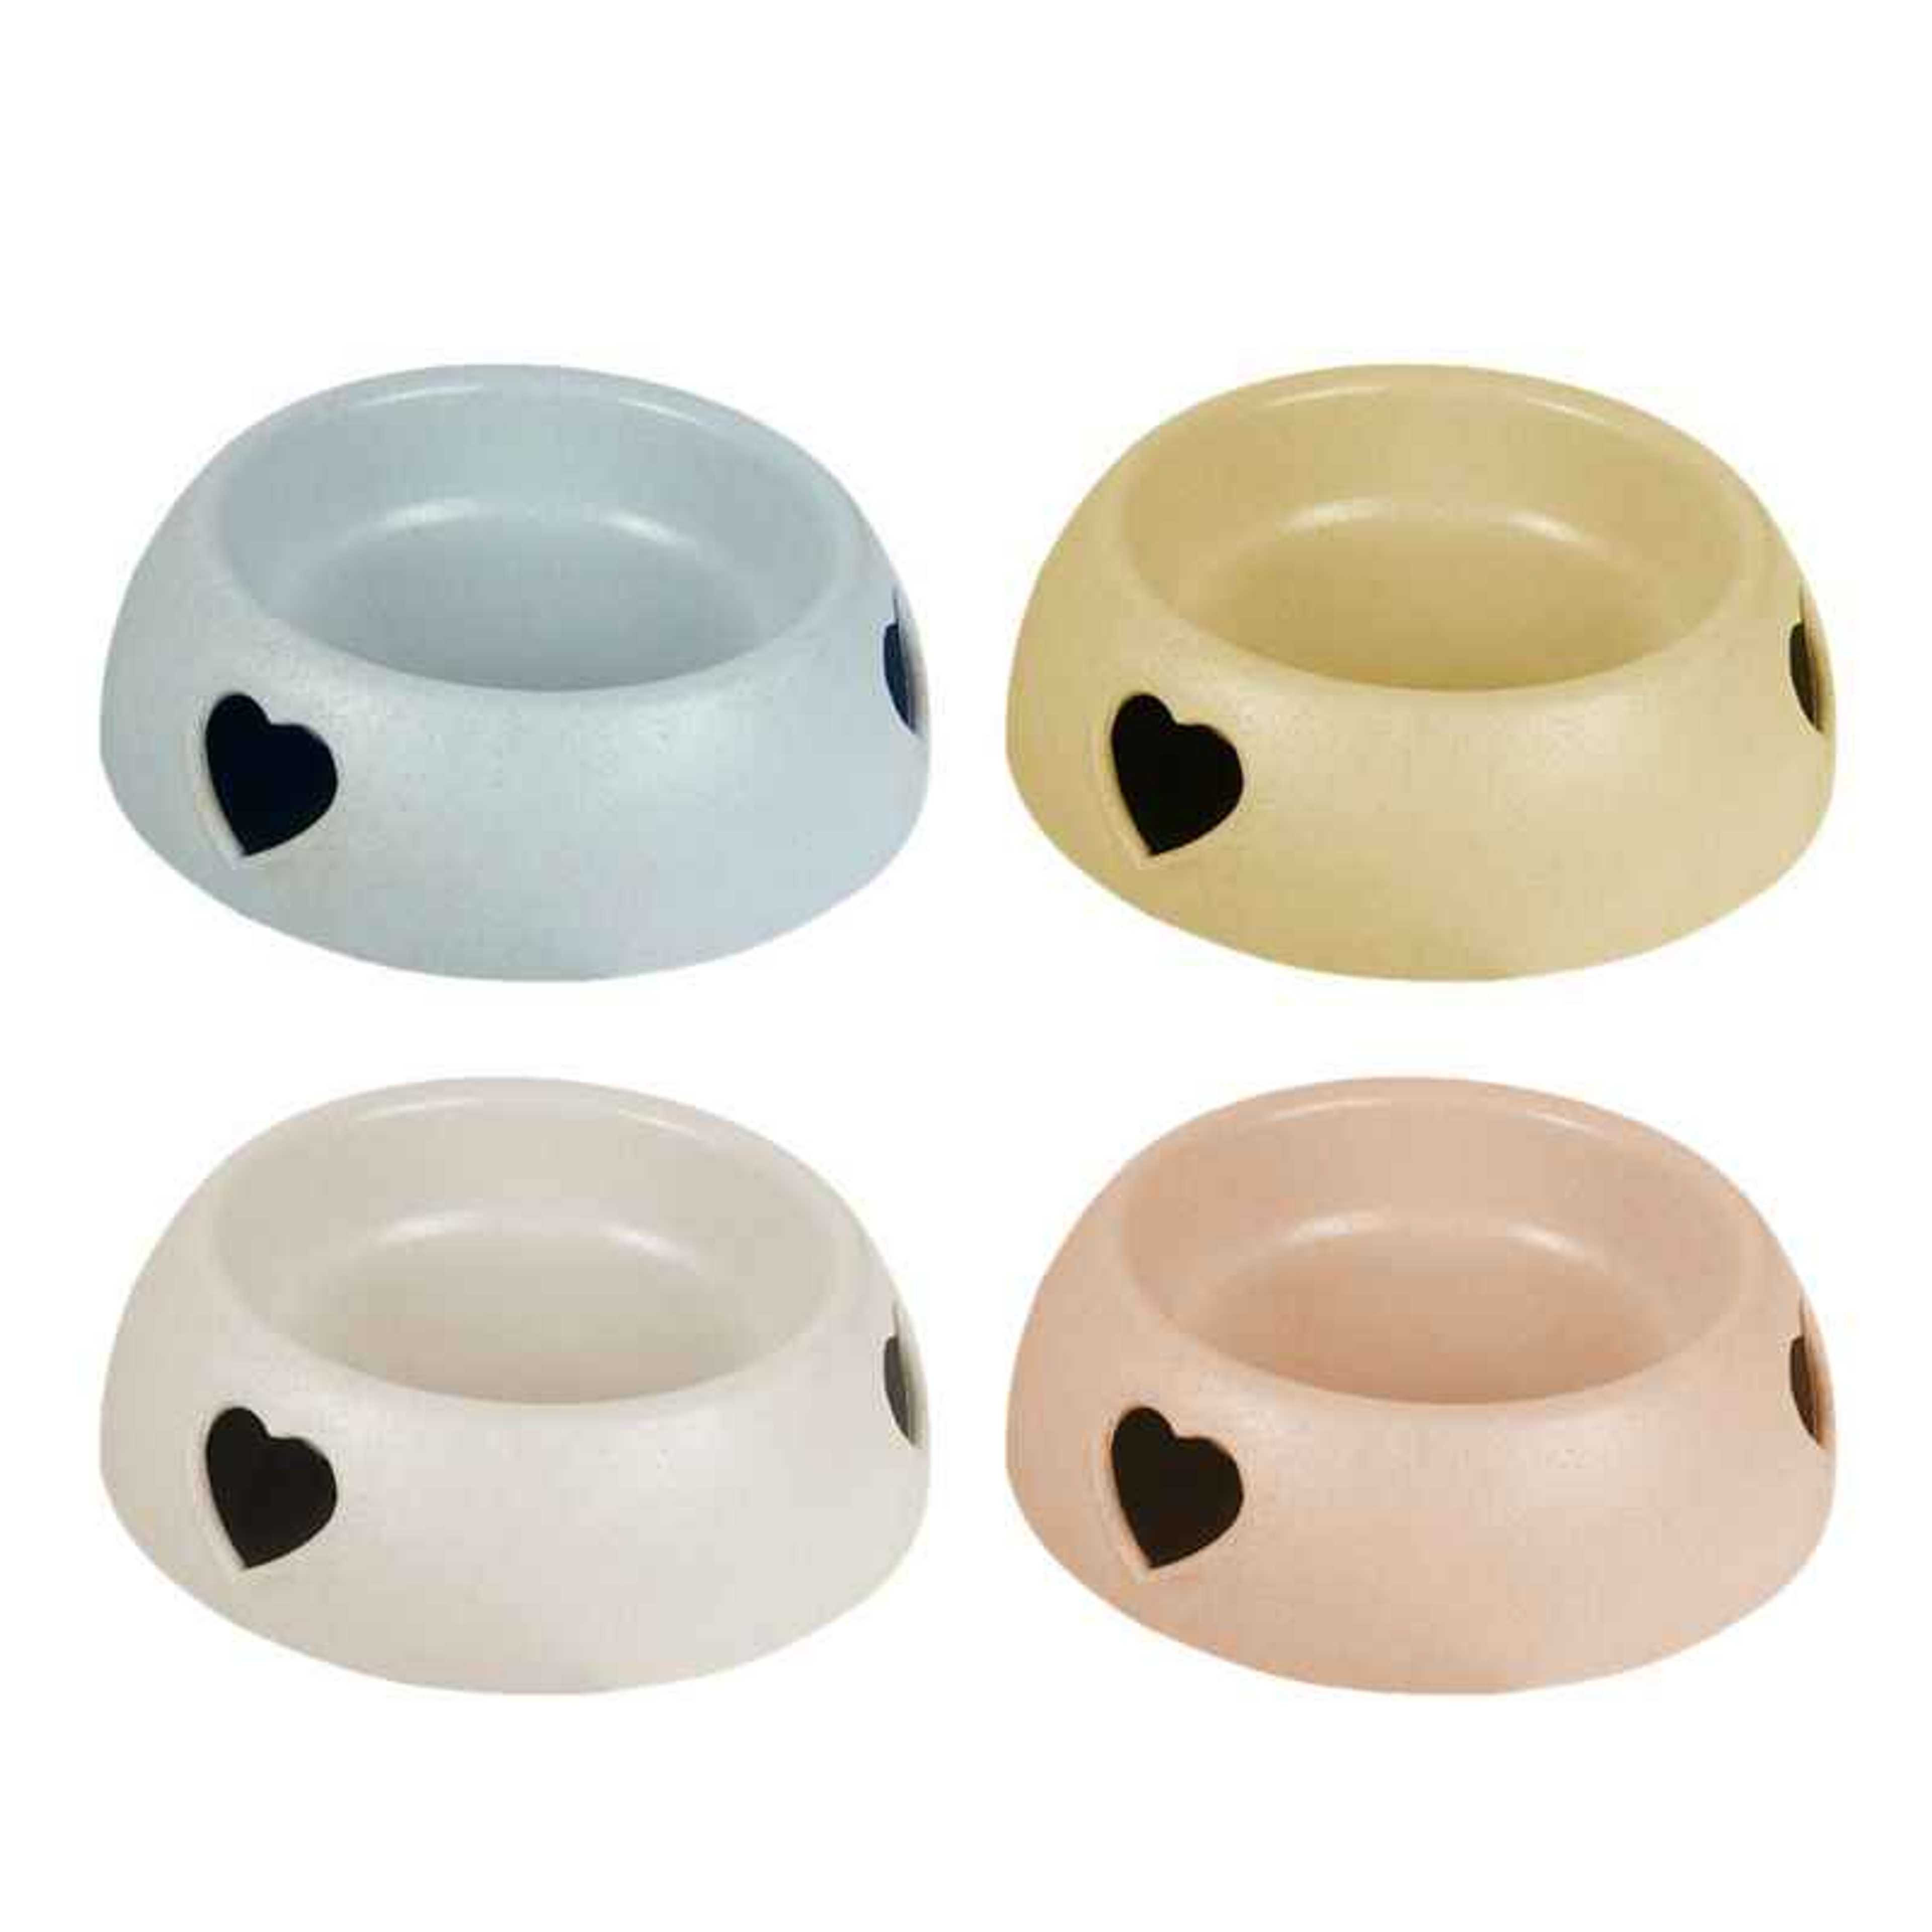 CAT SIMPLE BOWL FOR FOOD